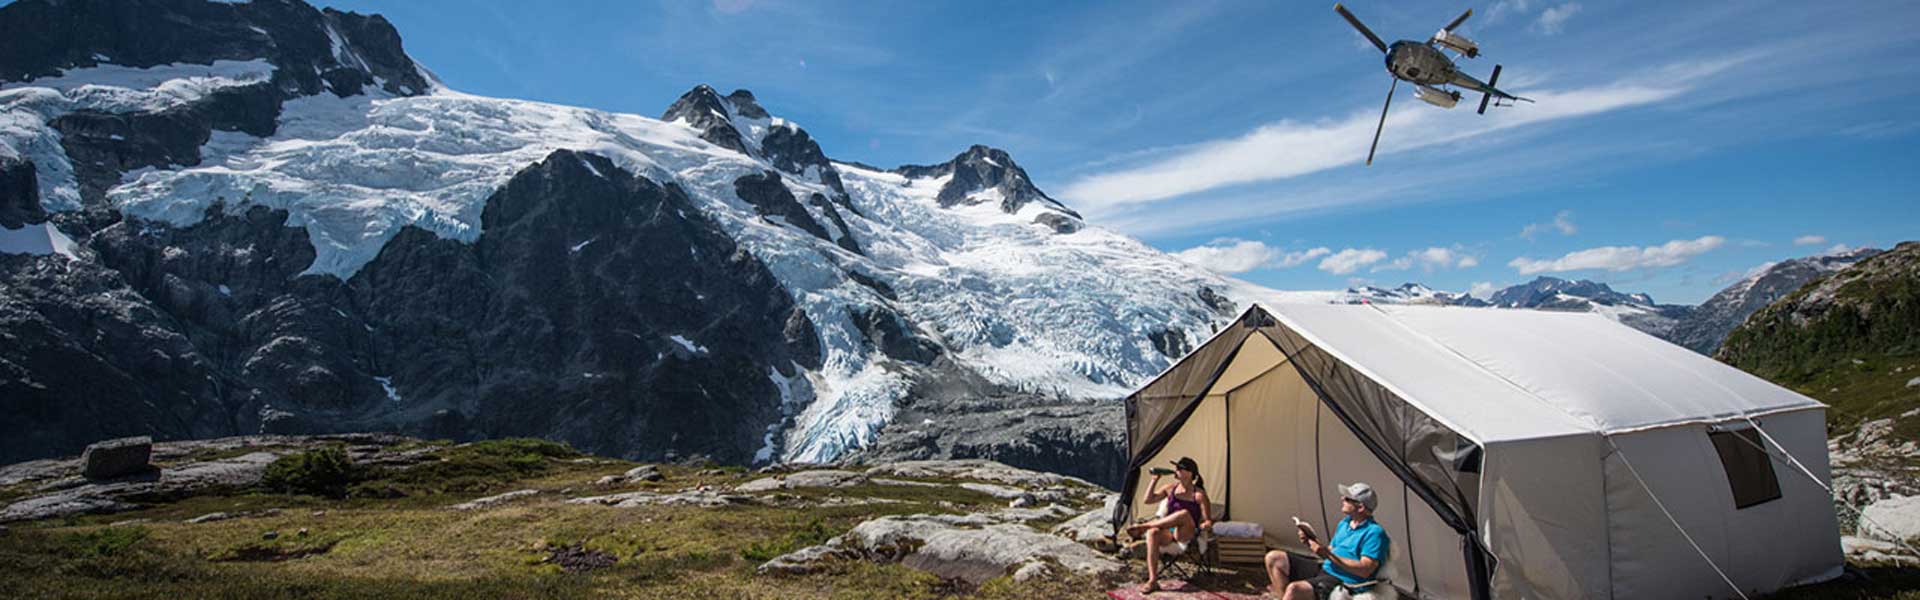 British Columbia Vacation Packages | British Columbia Road Trips